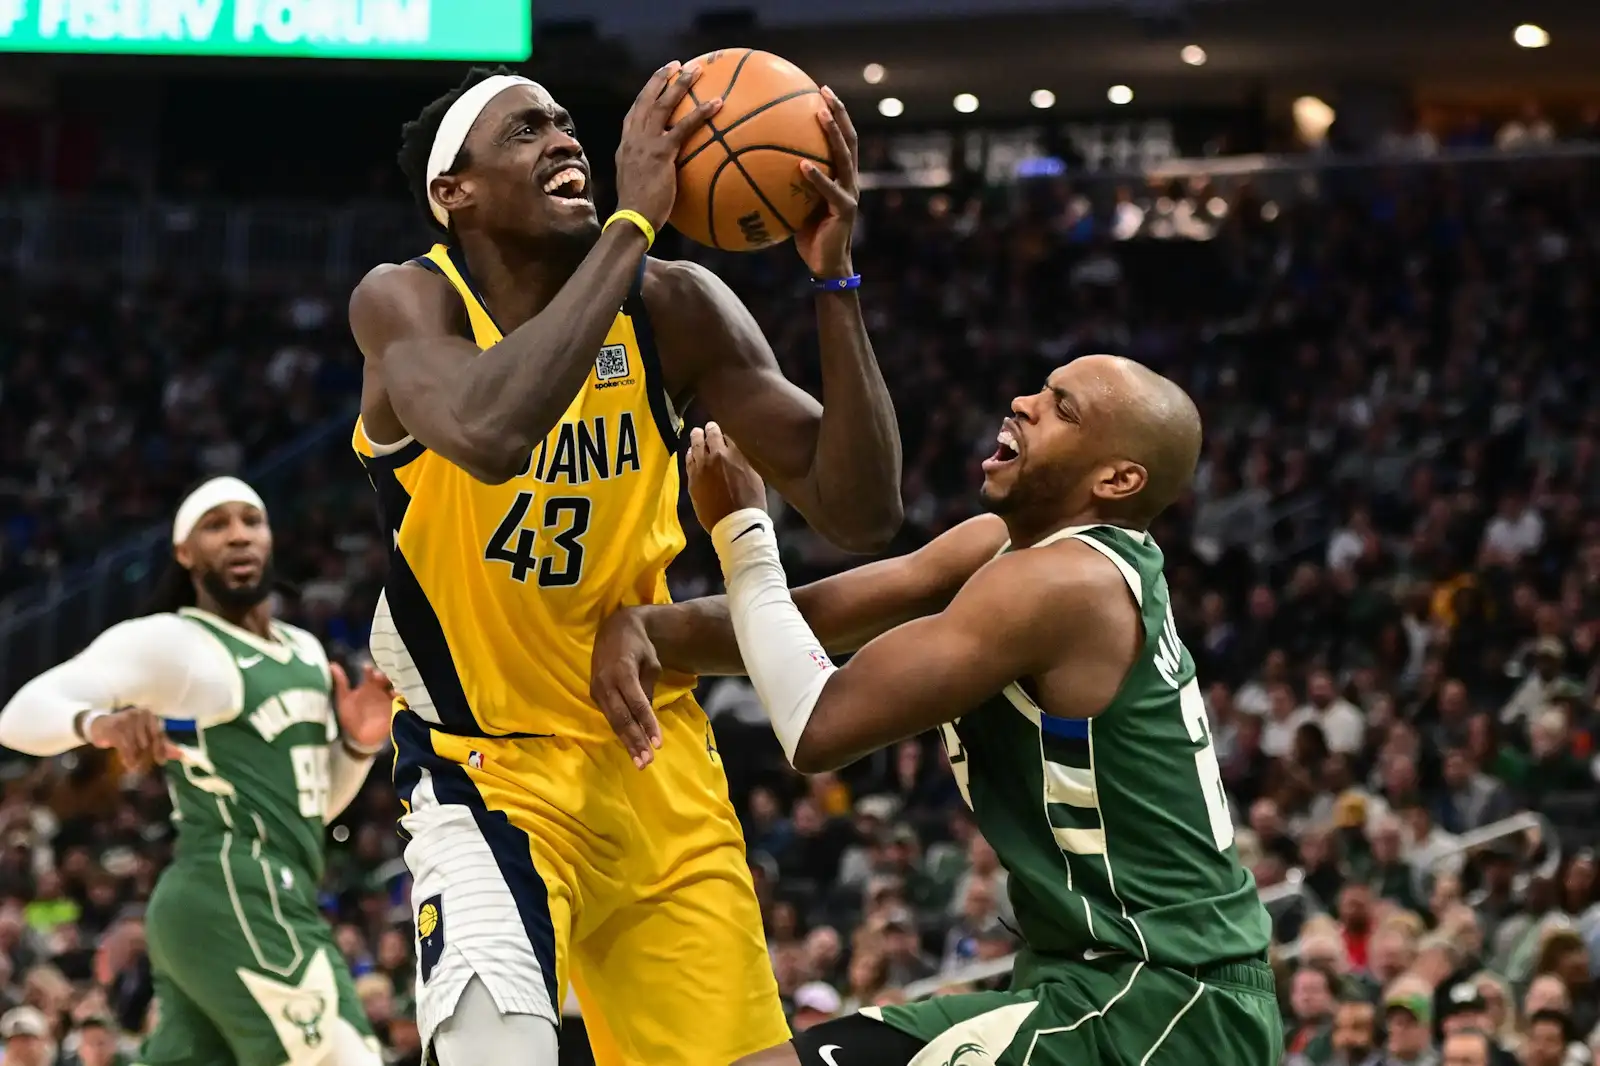 Siakam Shines with 37 Points, Pacers Tie Bucks in Playoff Thriller